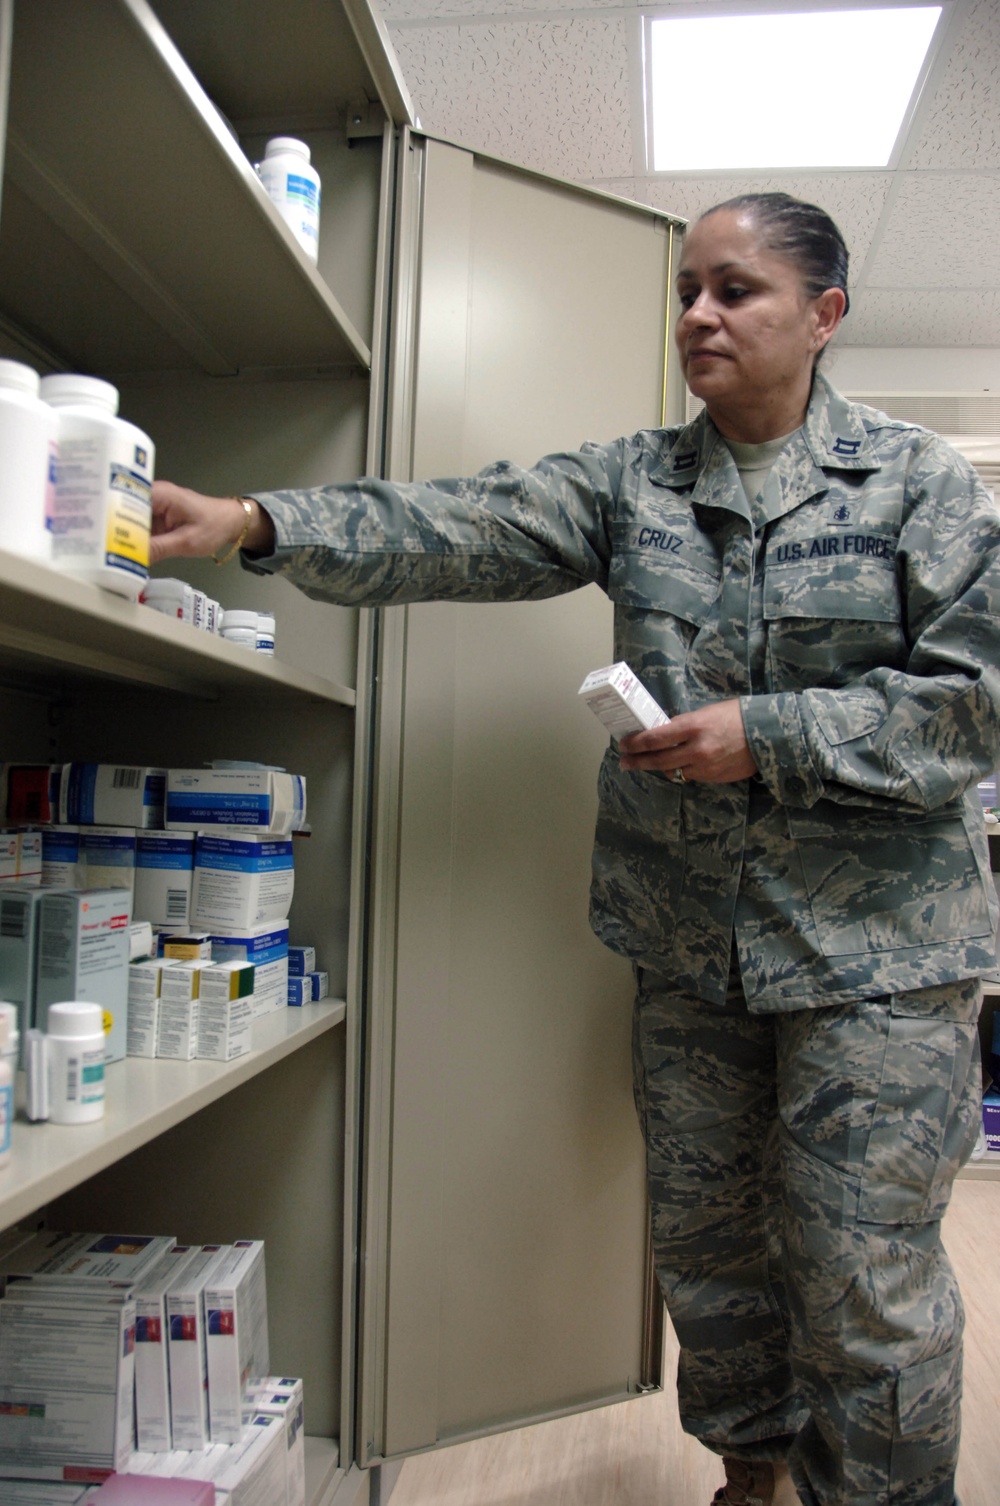 380th Expeditionary Medical Group Provides Medical Support, Counseling